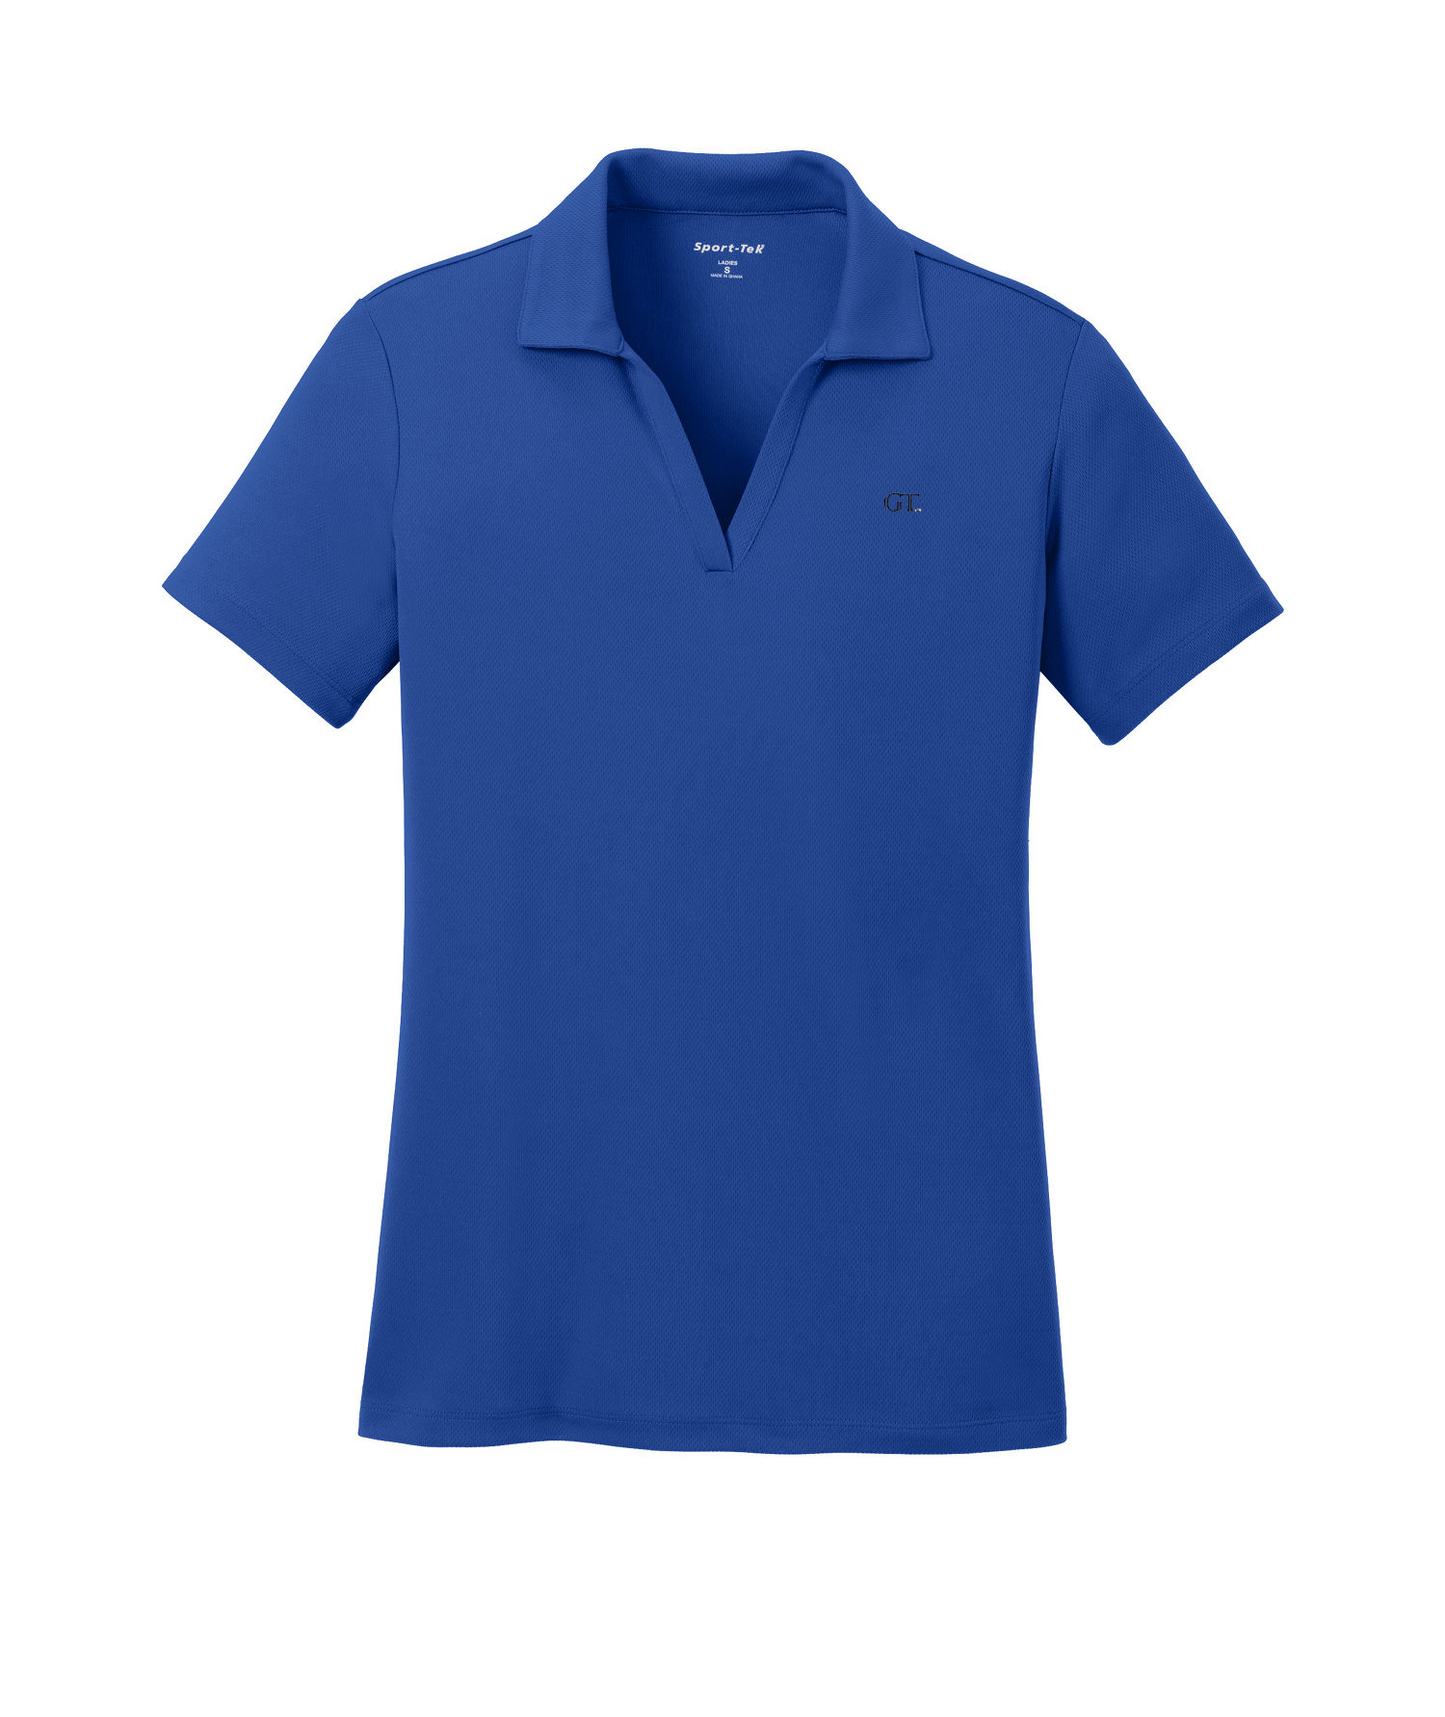 GT Sport Embroidered Women's Wicking Polo